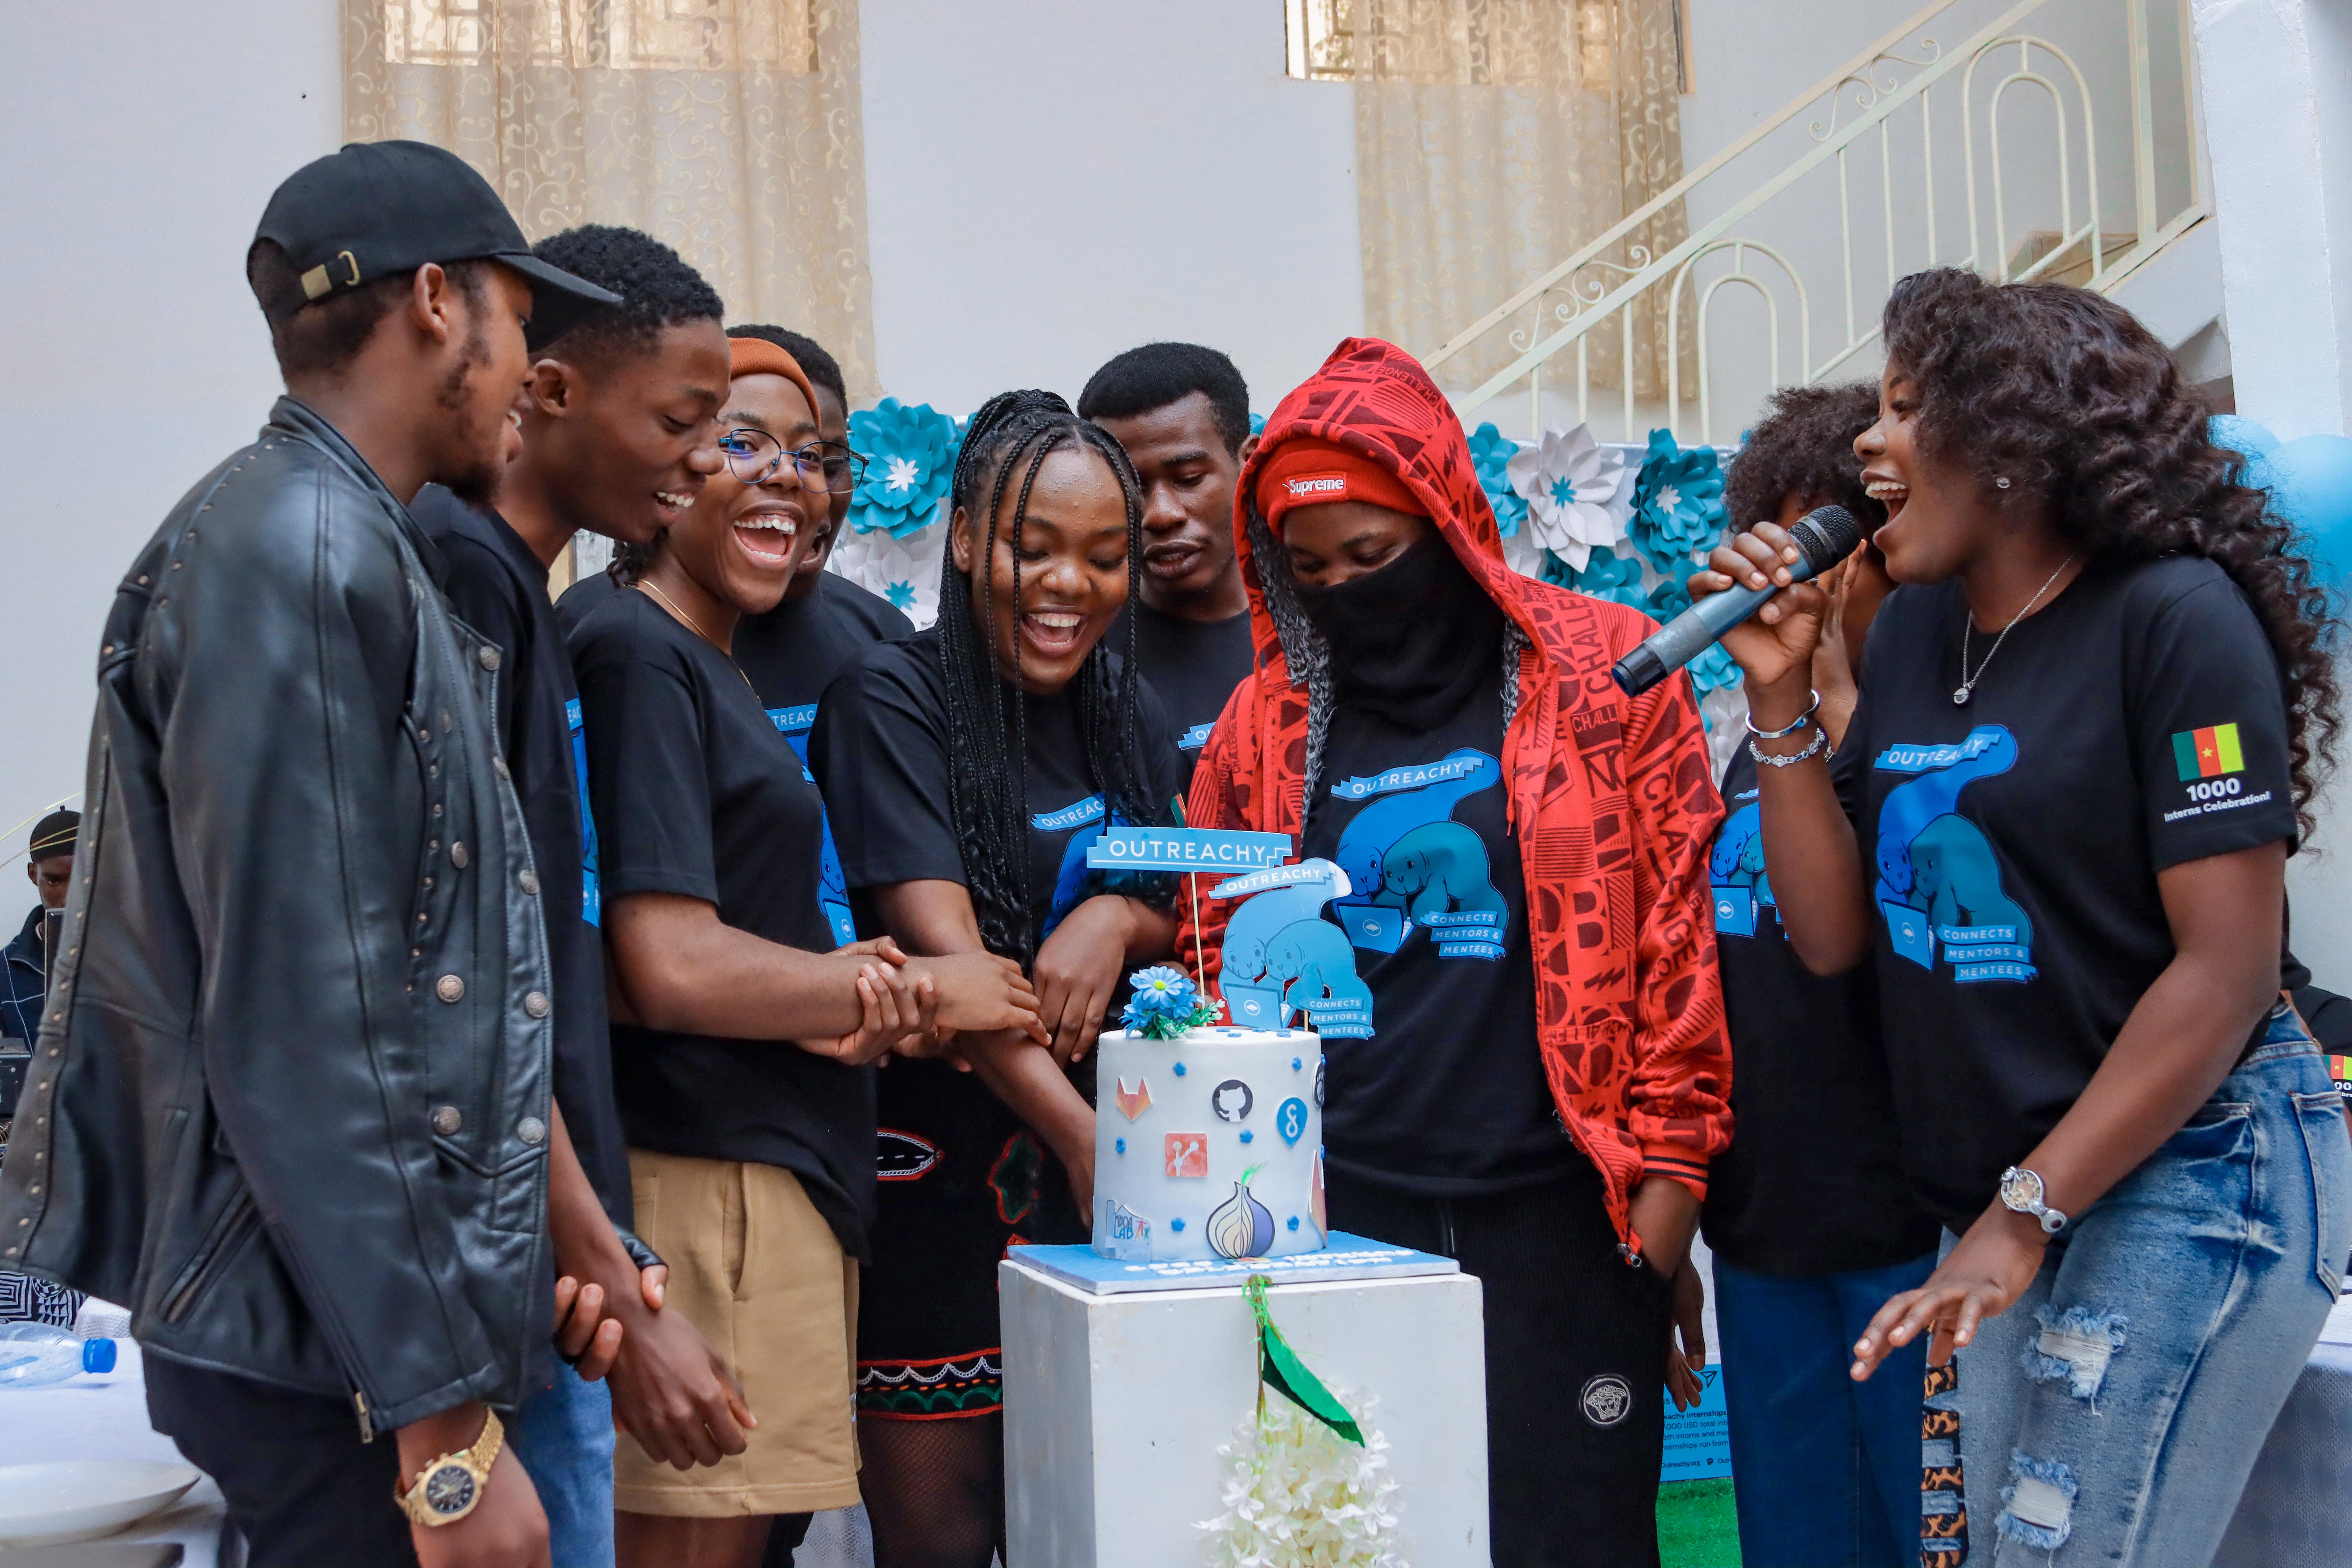 Group photo of Cameroon Outreachy interns cutting a cake with the Outreachy logo